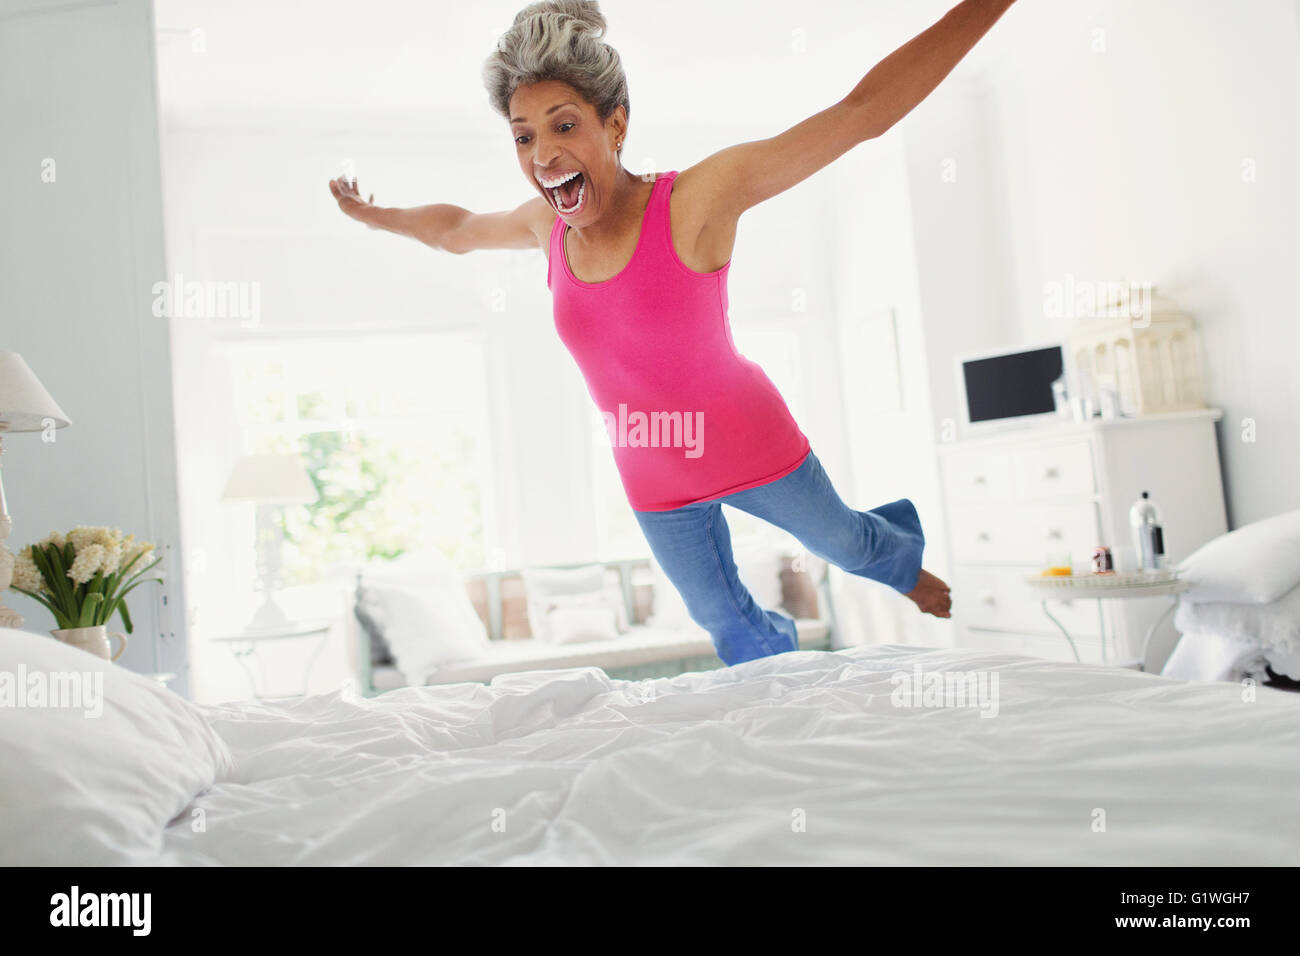 Playful mature woman jumping onto bed Stock Photo